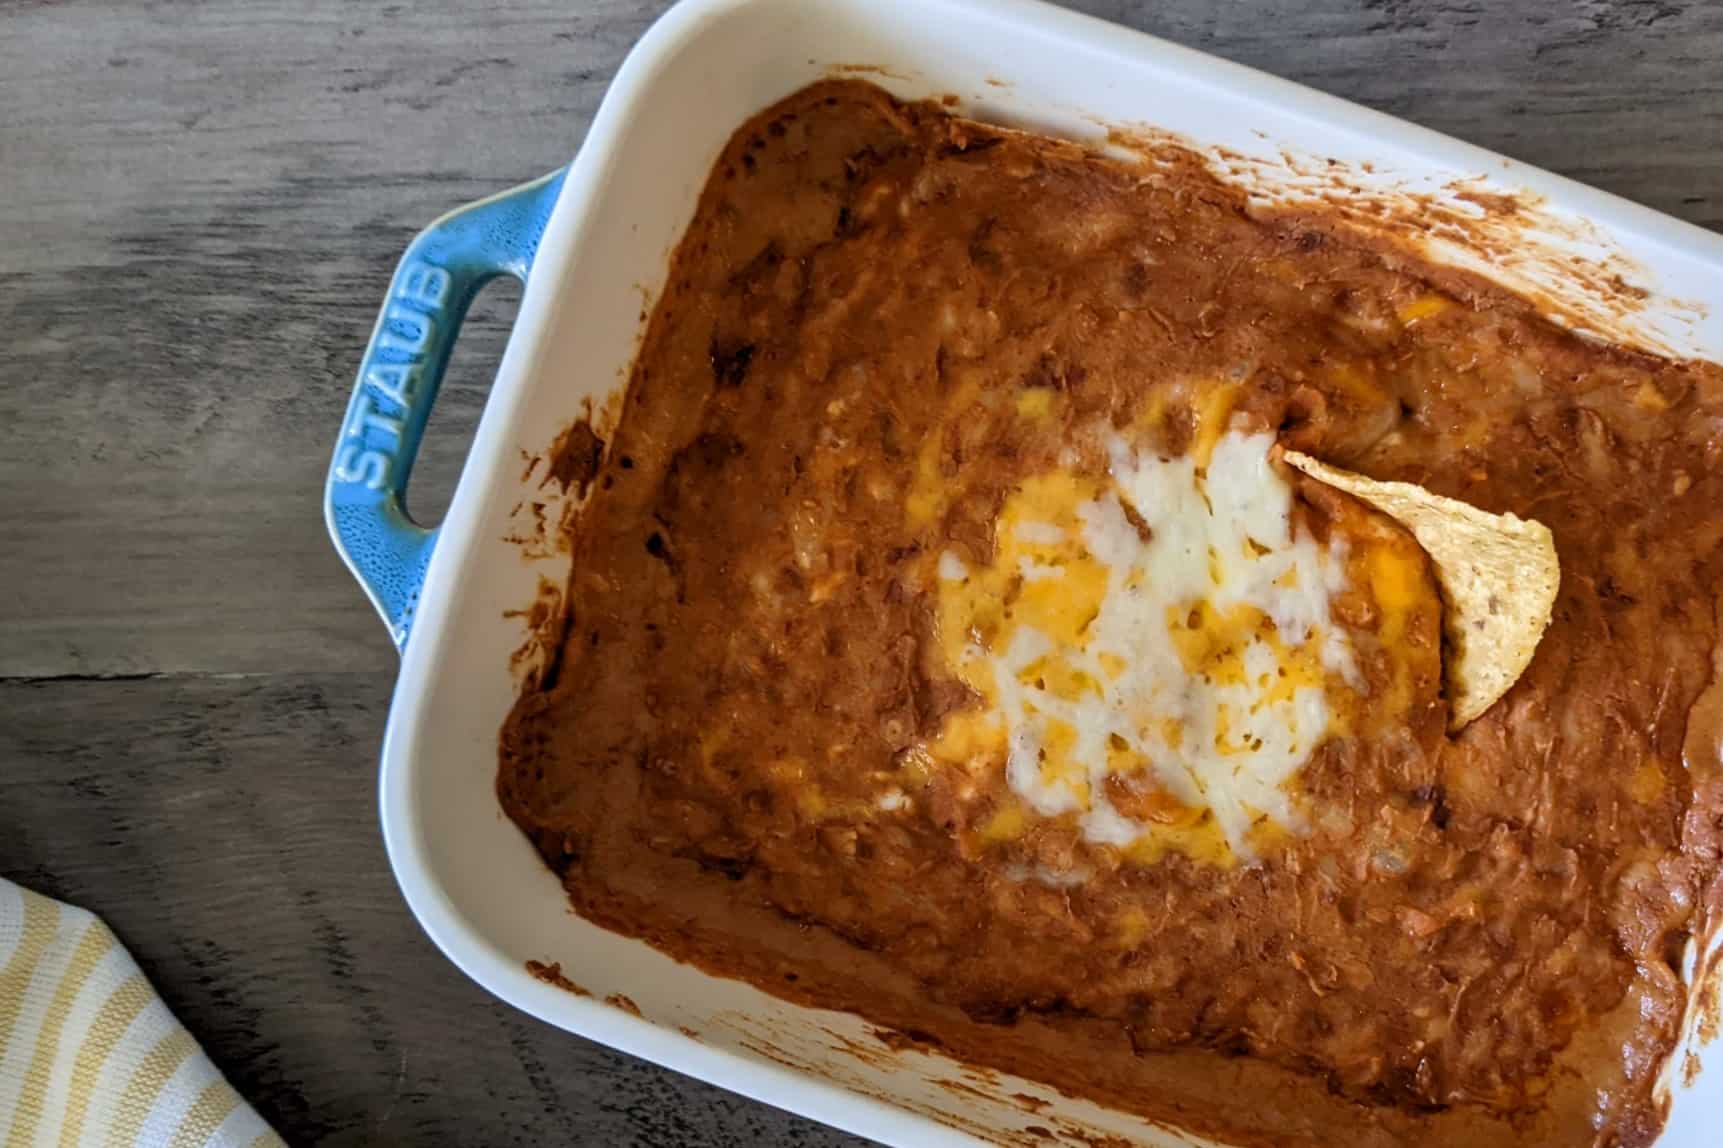 Oven-baked bean dip garnished with cheese and a tortilla chip